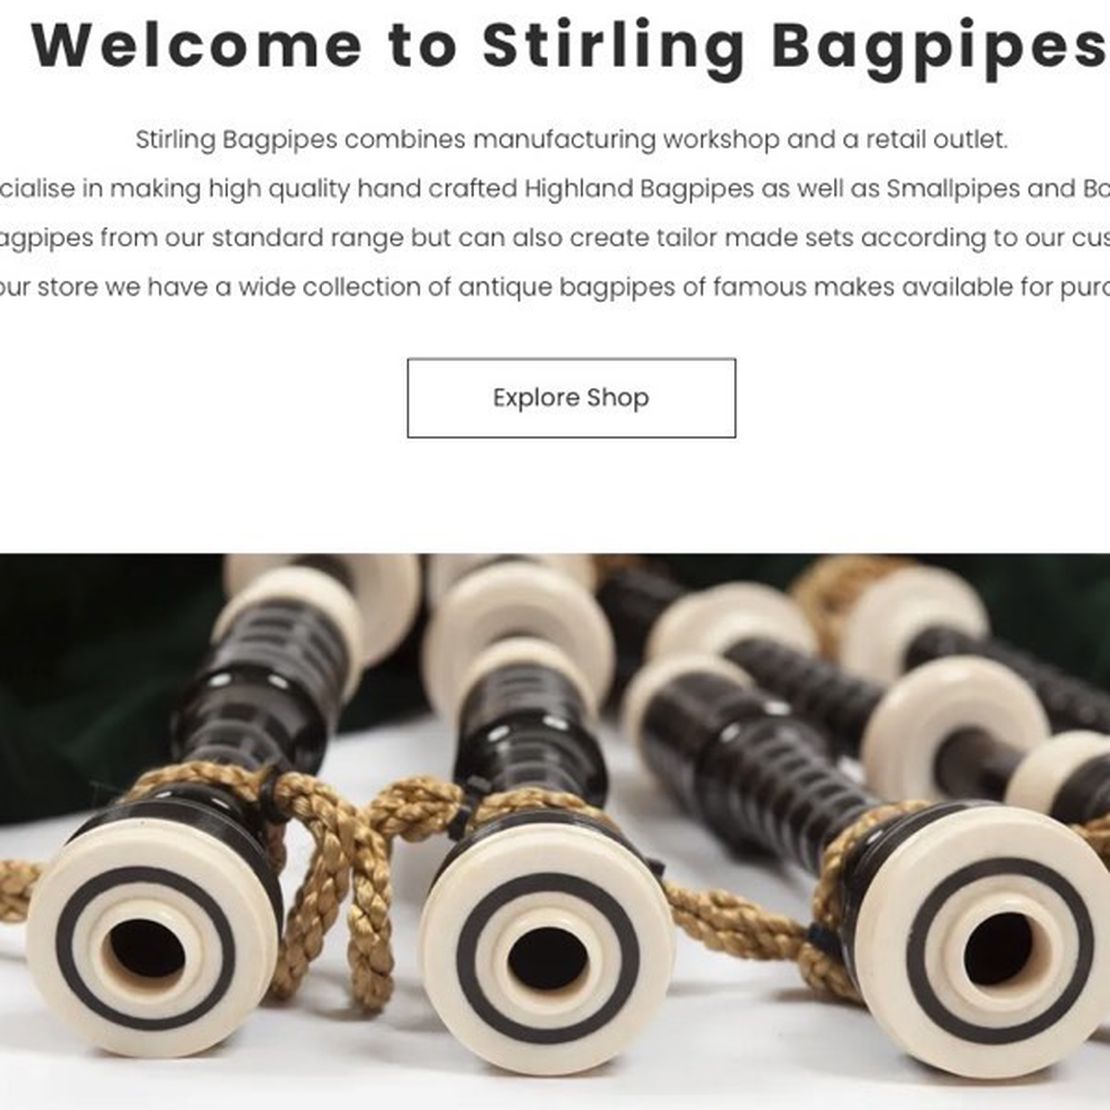 Stirling Bagpipe